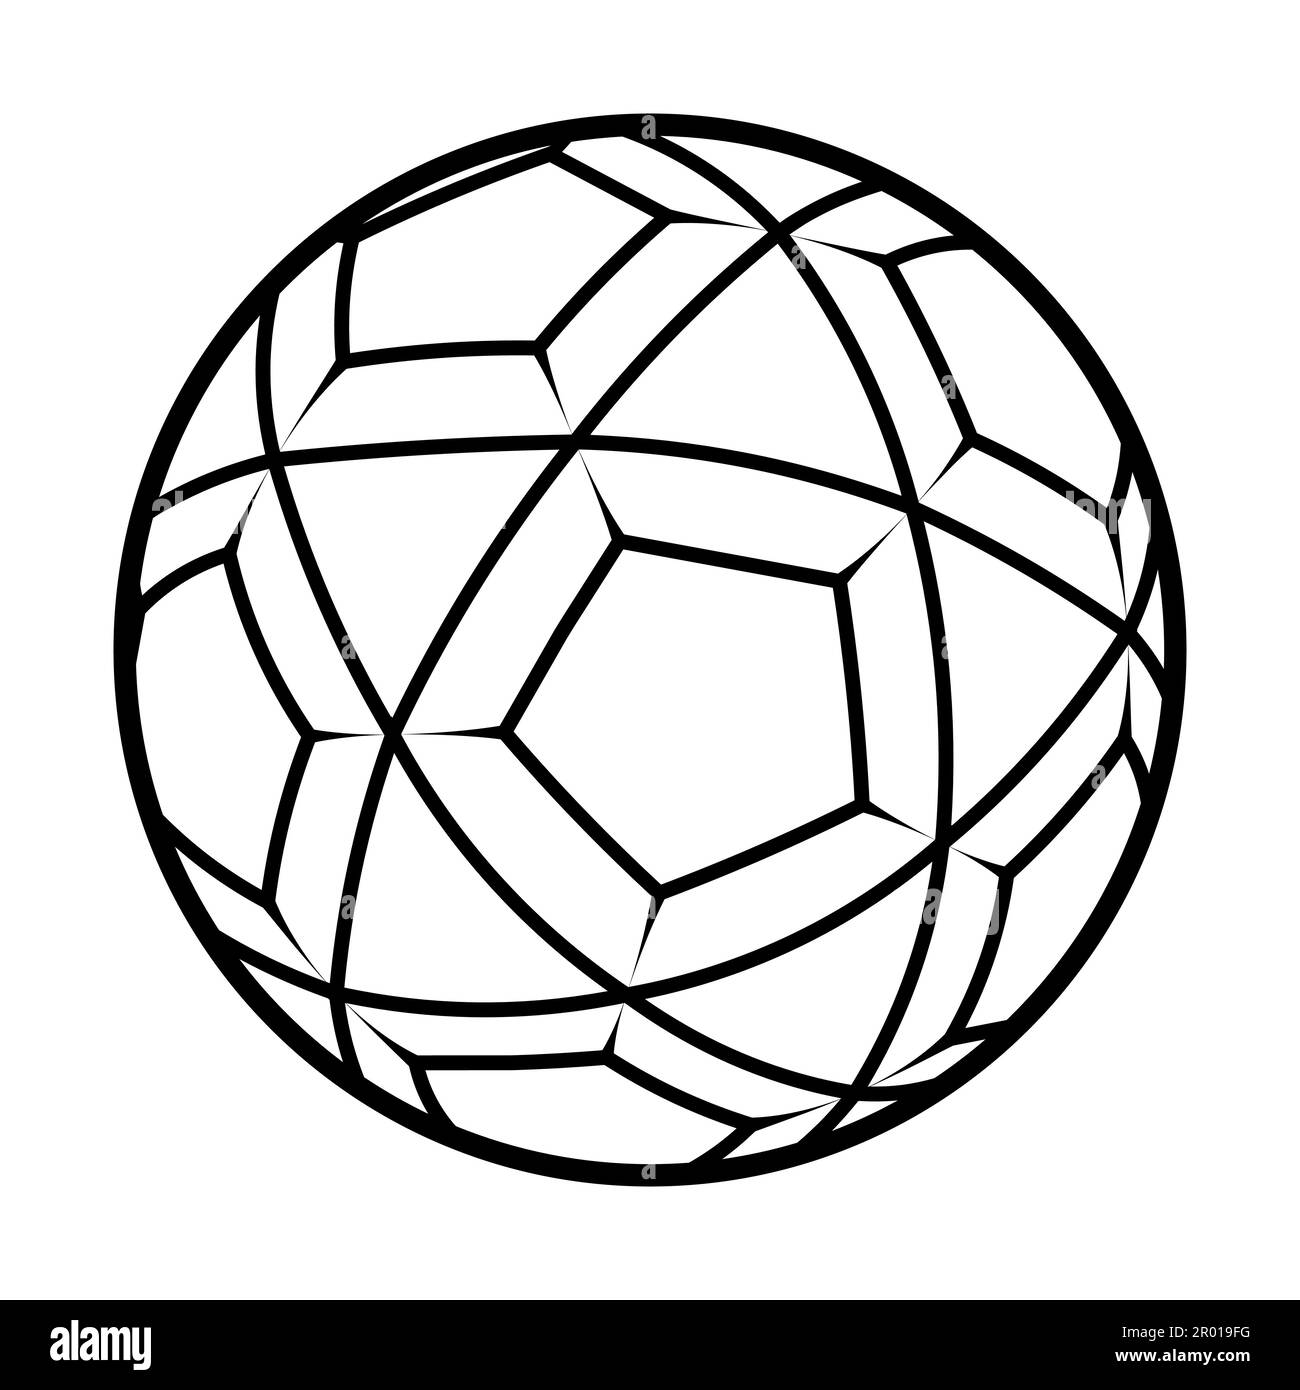 Soccer ball or football flat vector icon for sports Stock Vector